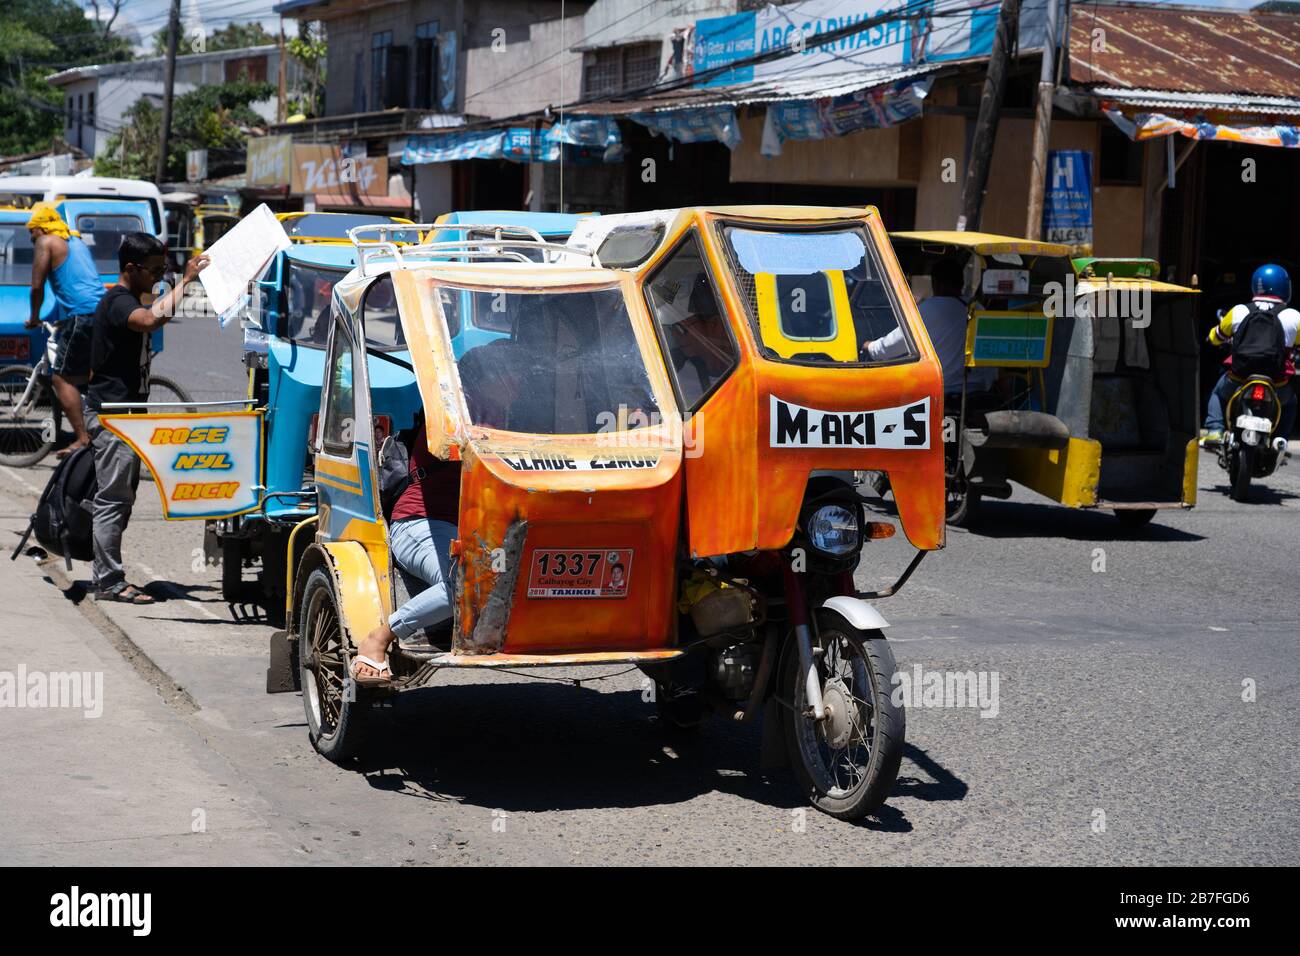 Traditional small tricycle public transportation vehicles used in the Philippines.Styles can vary in different provinces these particular vehicles cap Stock Photo